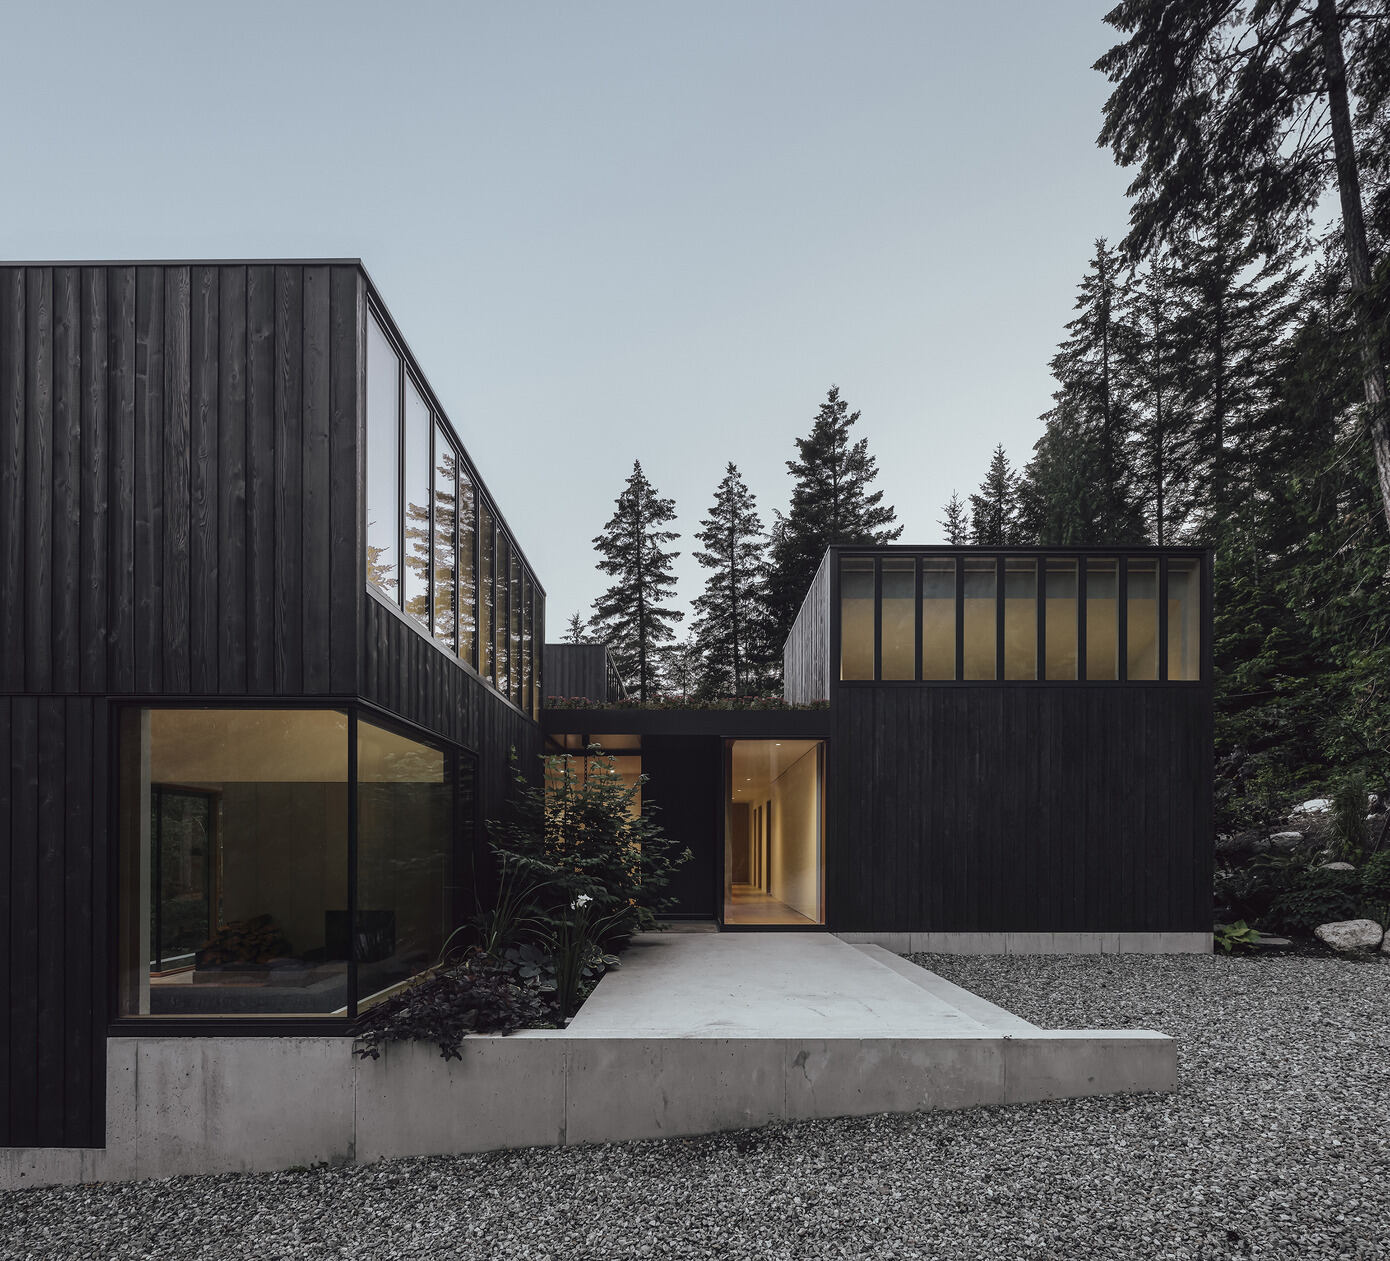 Camera House: Unique Architectural Gem Amidst Lush Canadian Forests